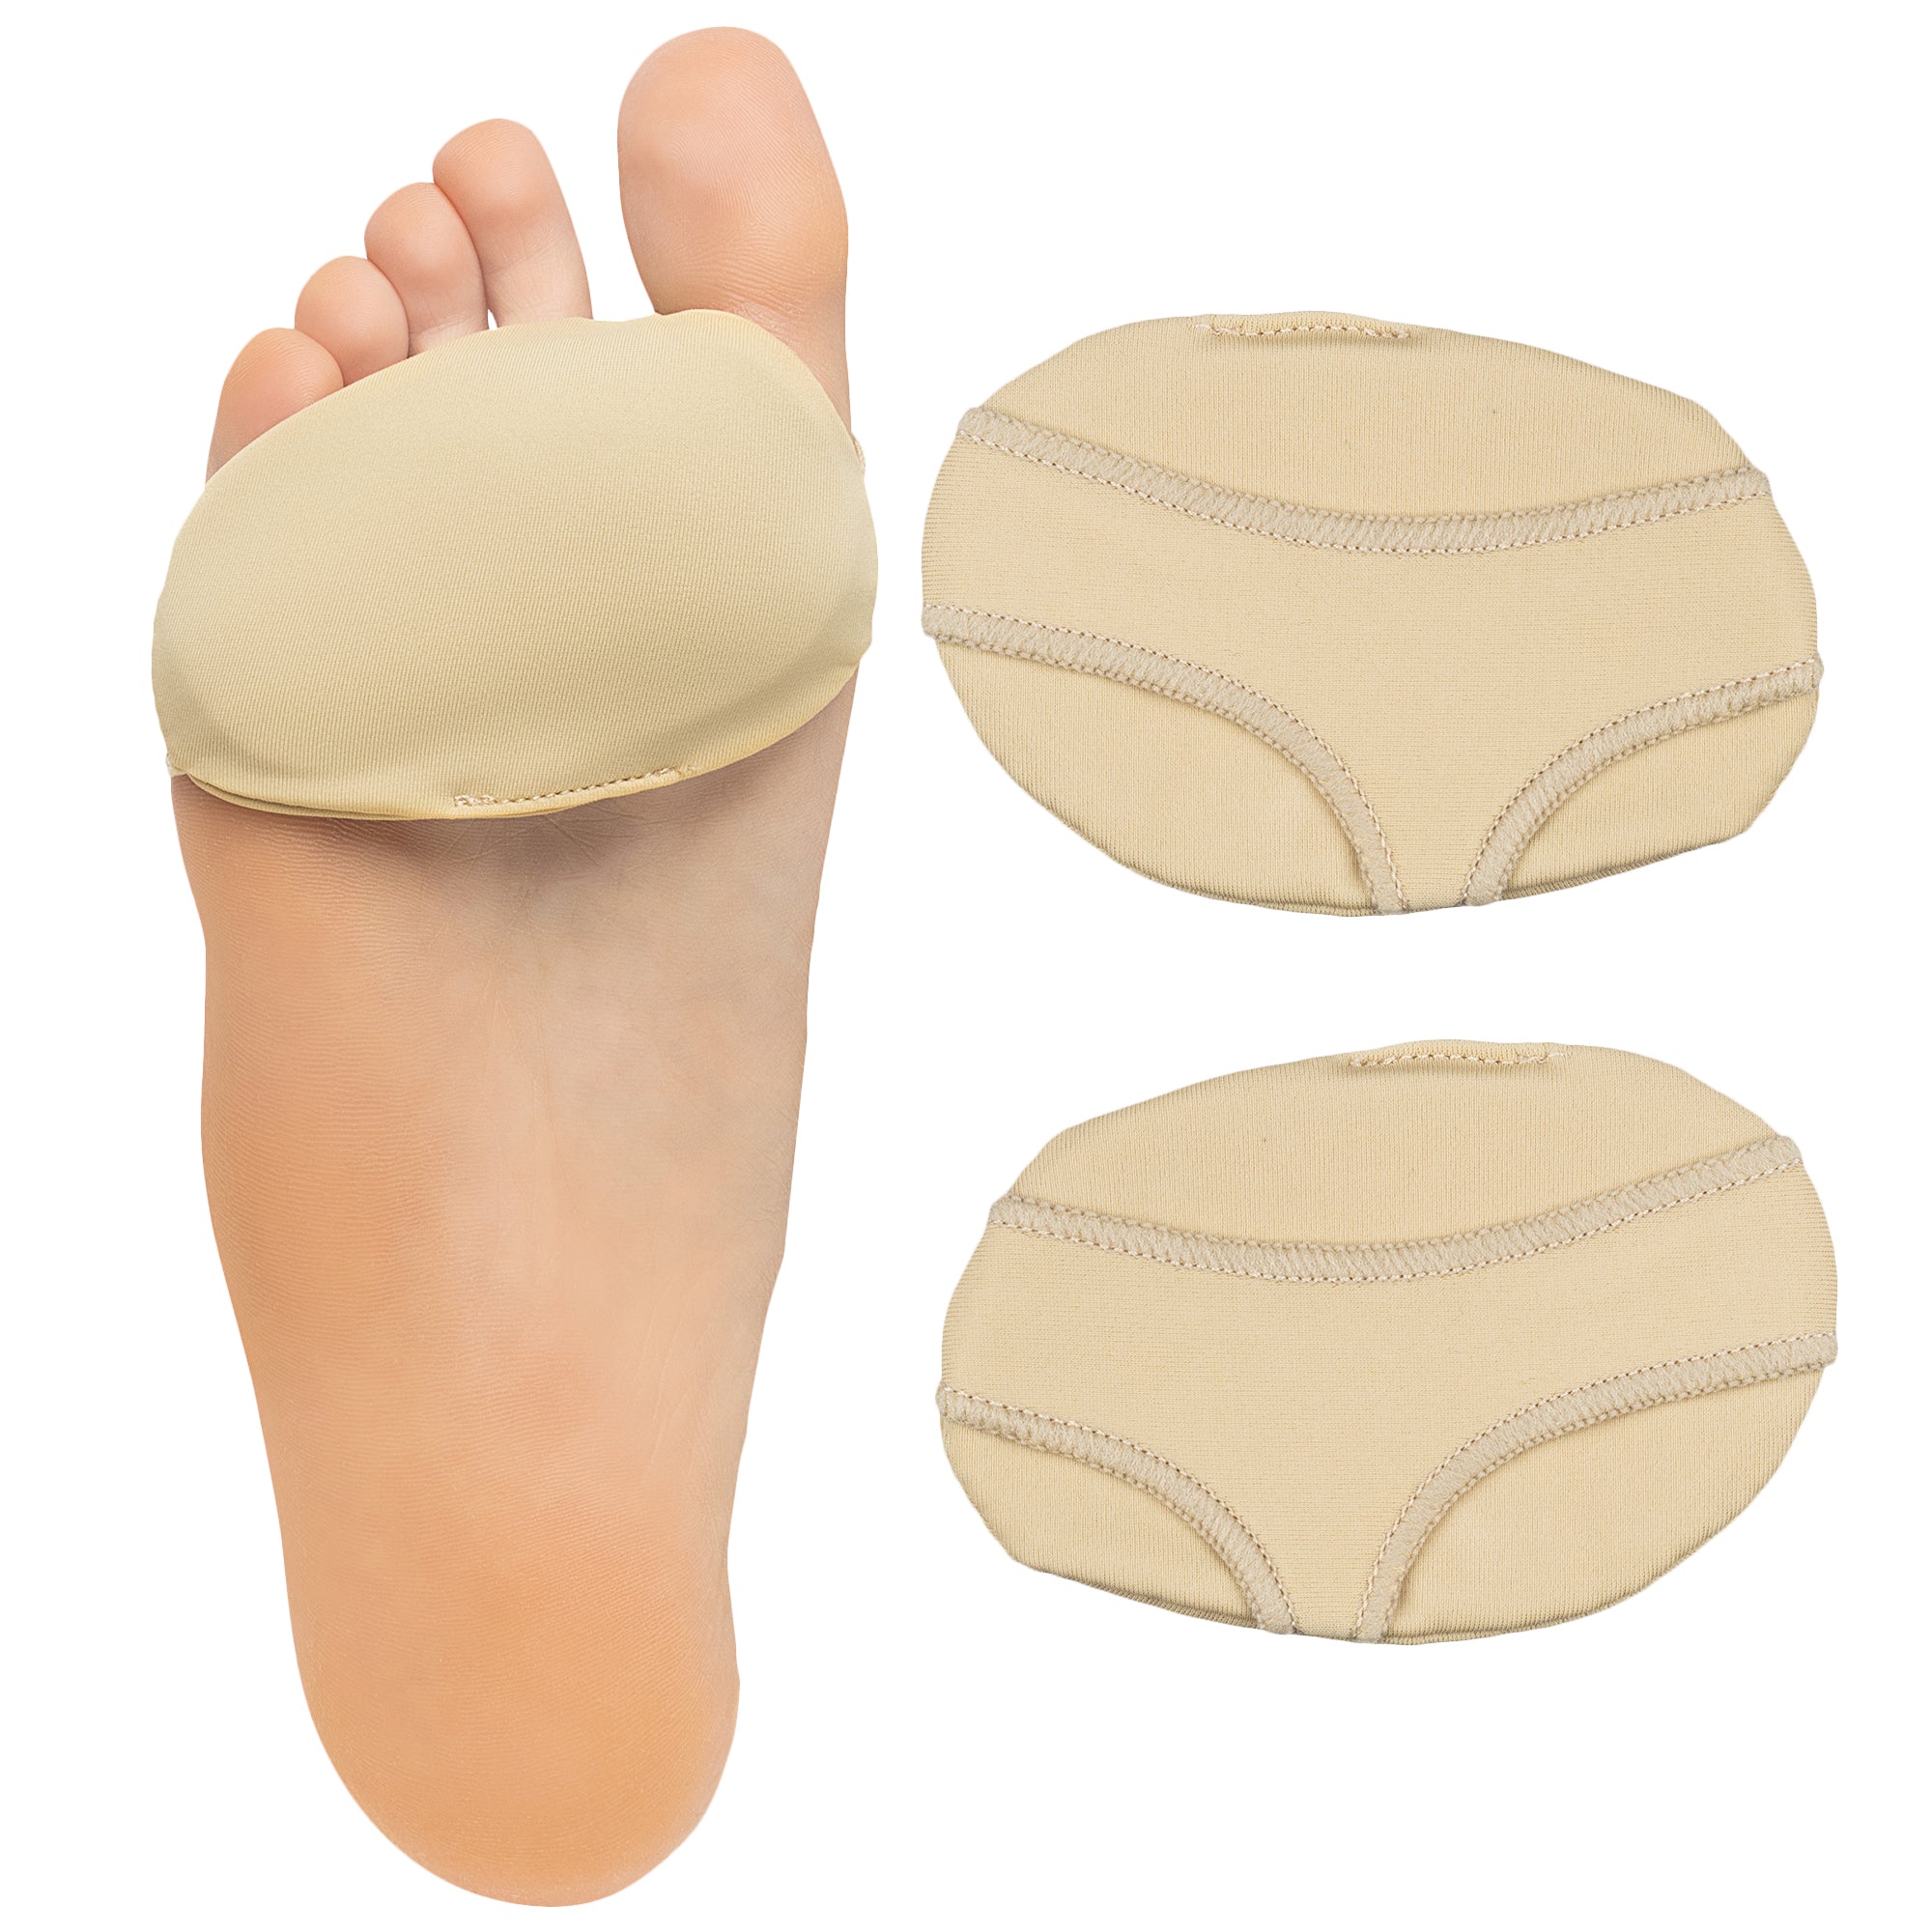 Foot Arch Support Brace Adjustable Padded Support Foot Relief Cushions  Cushioned